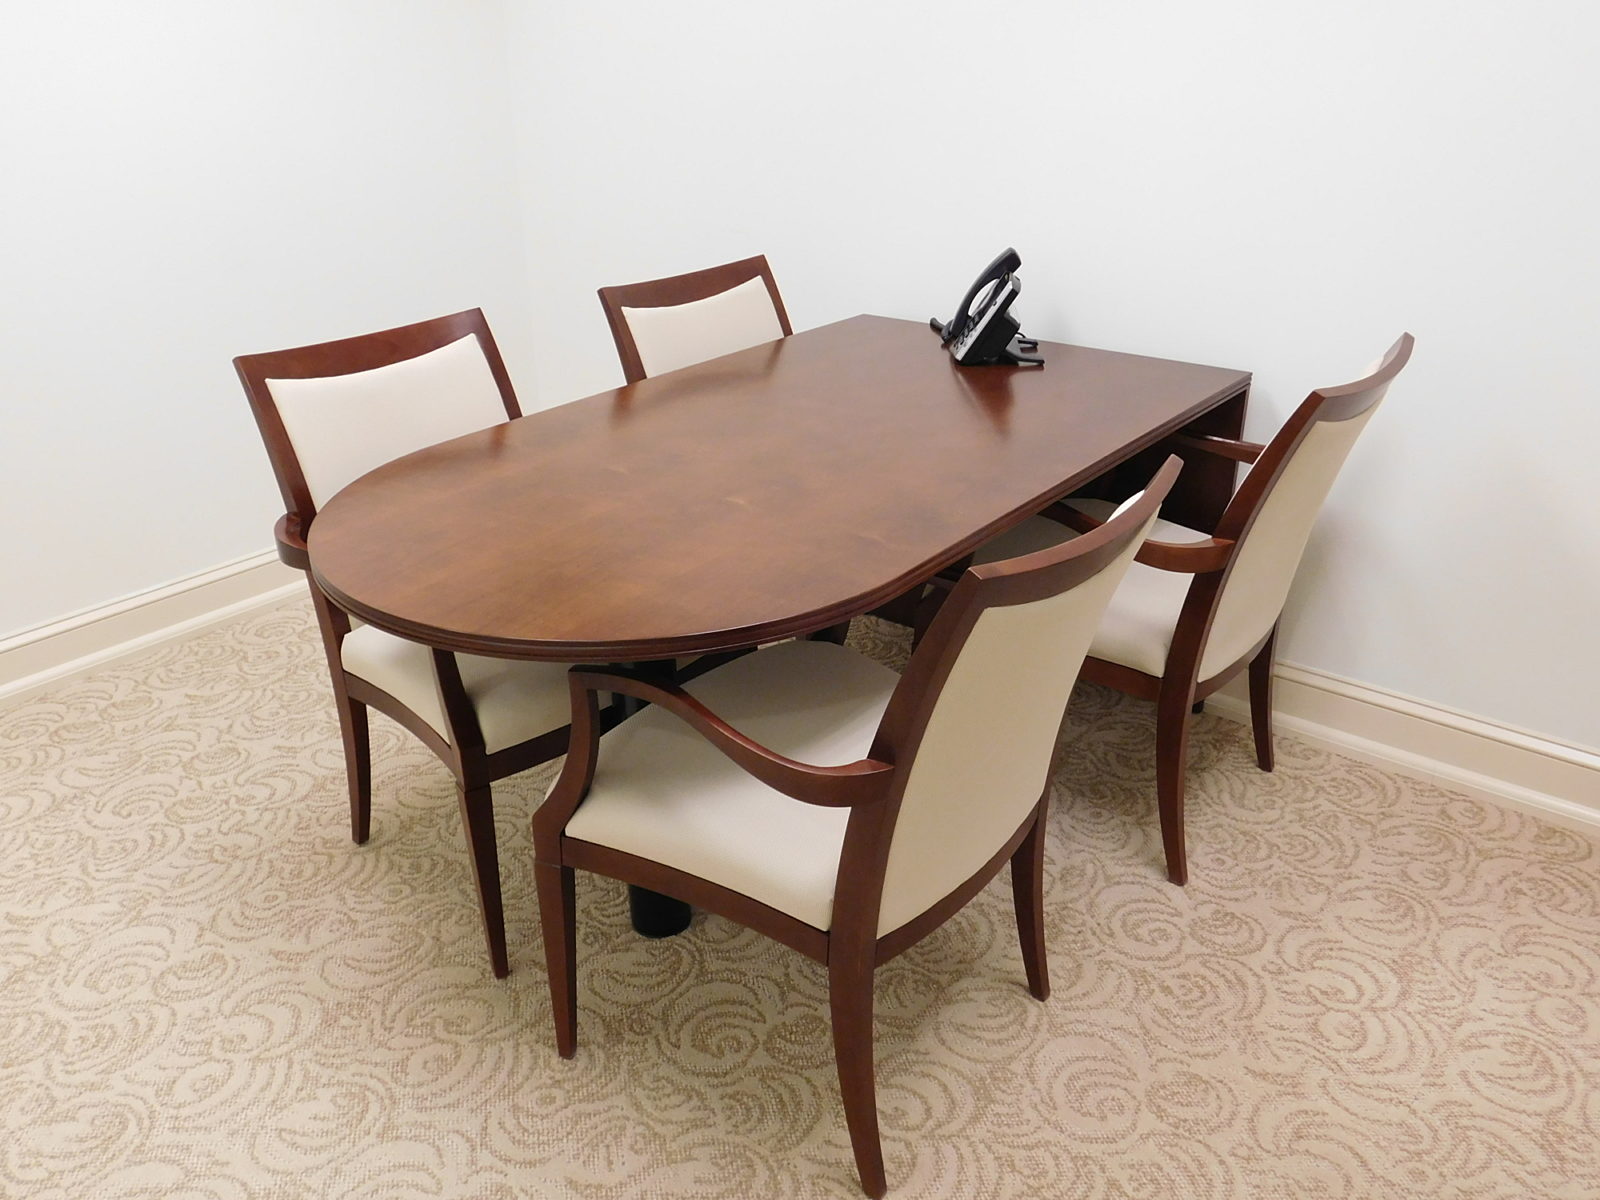 D-top table, cherry wood with 4 white armchairs with wooden frame